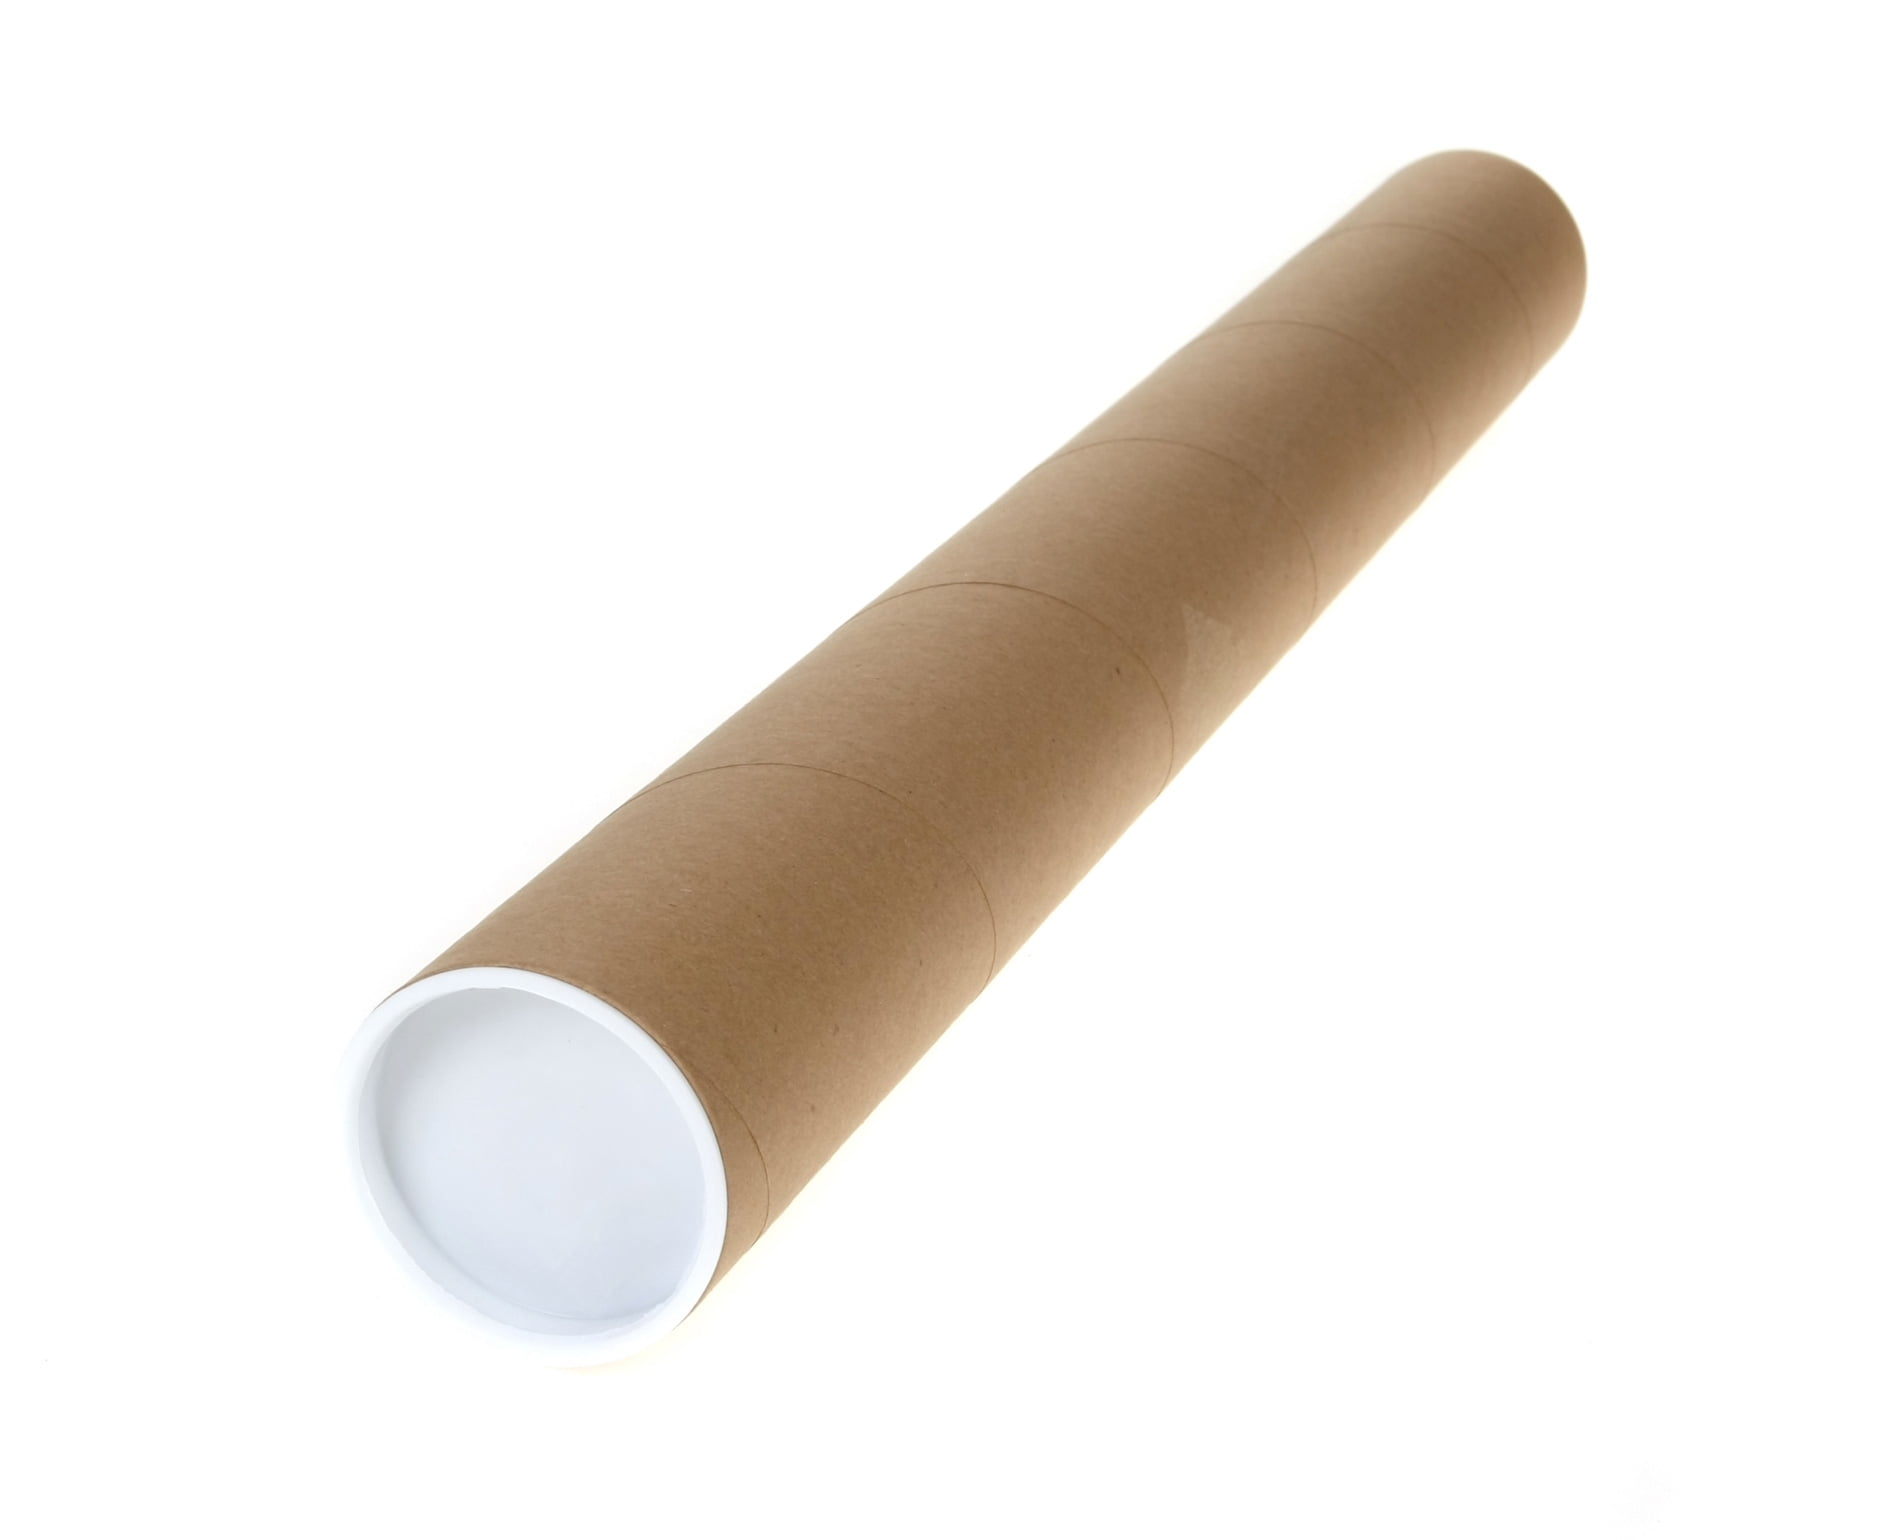  LOEQIAN 16 PCS 2 x 16 Inch Kraft Mailing Tubes with Caps,  Mailers Poster Shipping Tubes, Cardboard Mailing Tubes for Shipping,  Storing, Mailing, Blueprints, Posters : Office Products